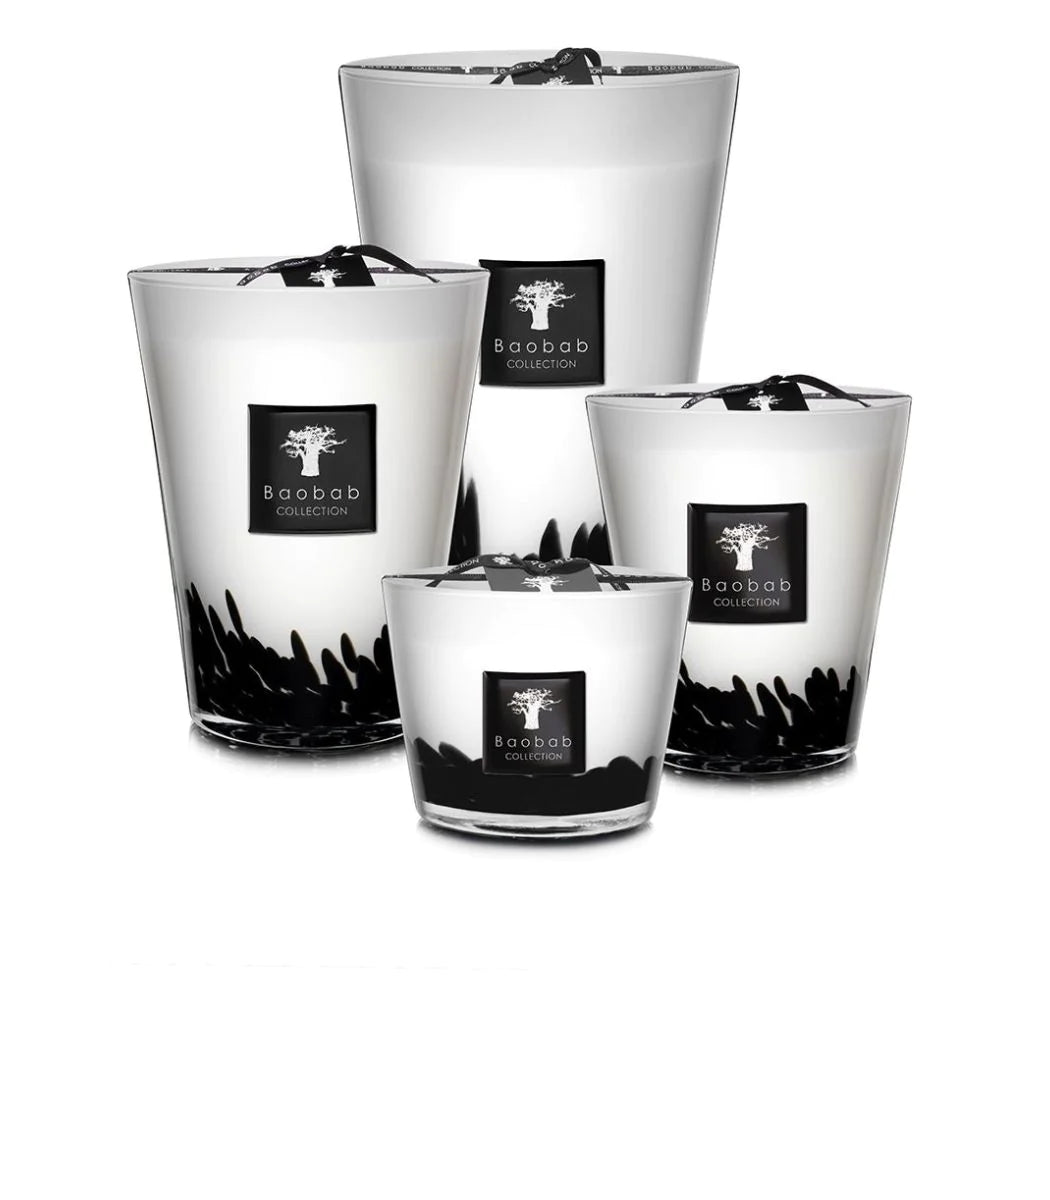 BAOBAB COLLECTION Feathers Candle